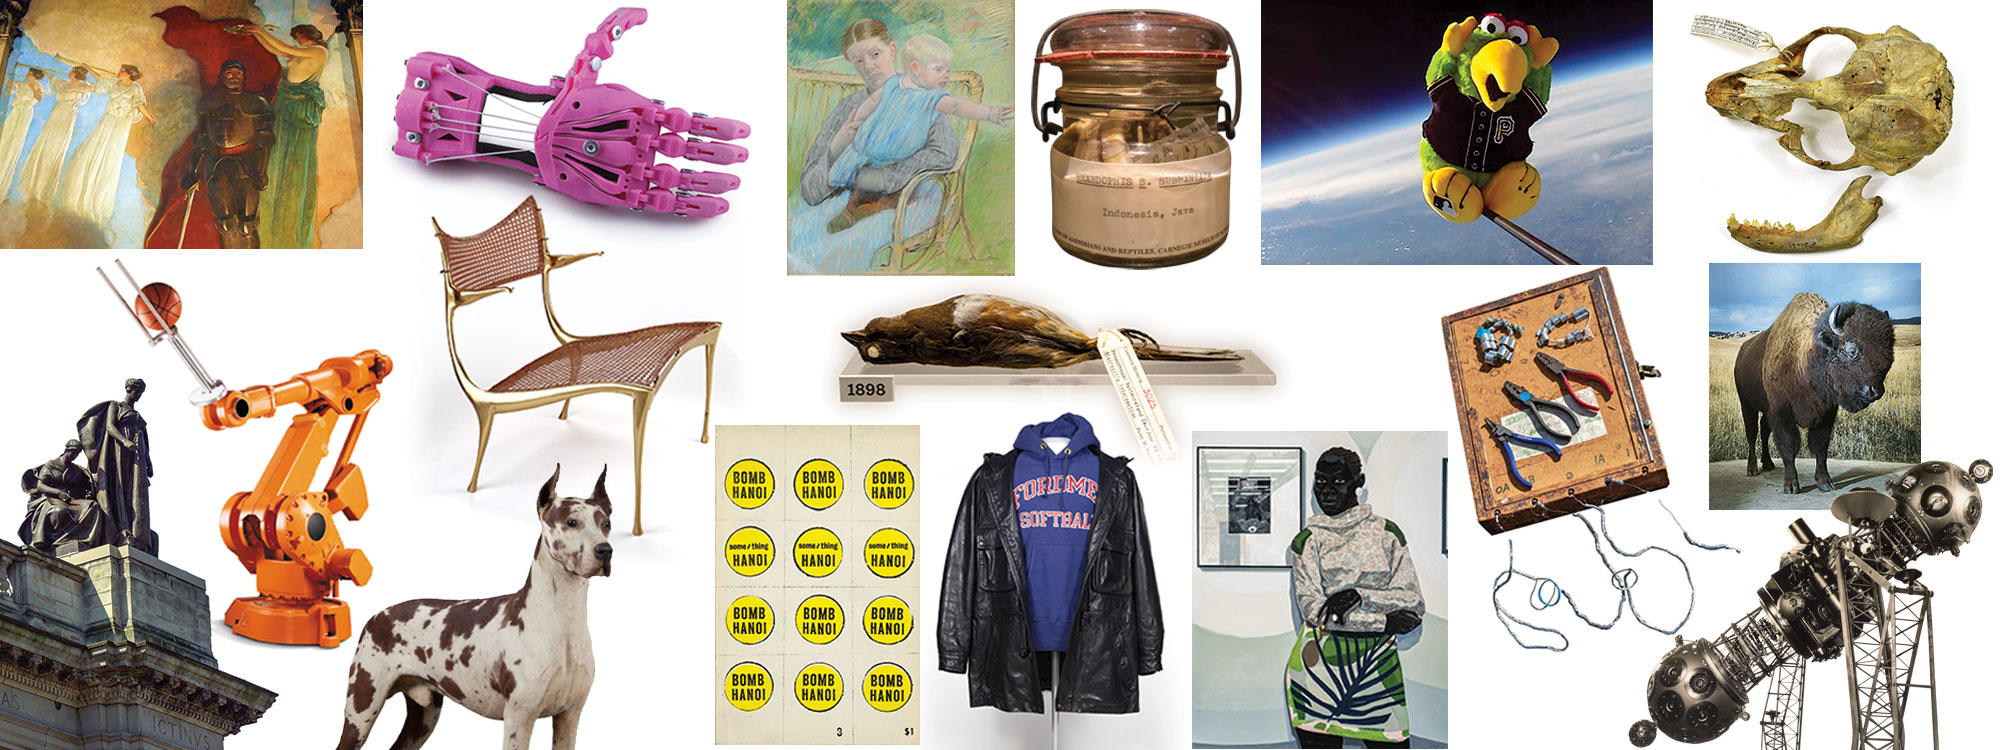 A collage of objects from the Museum collections